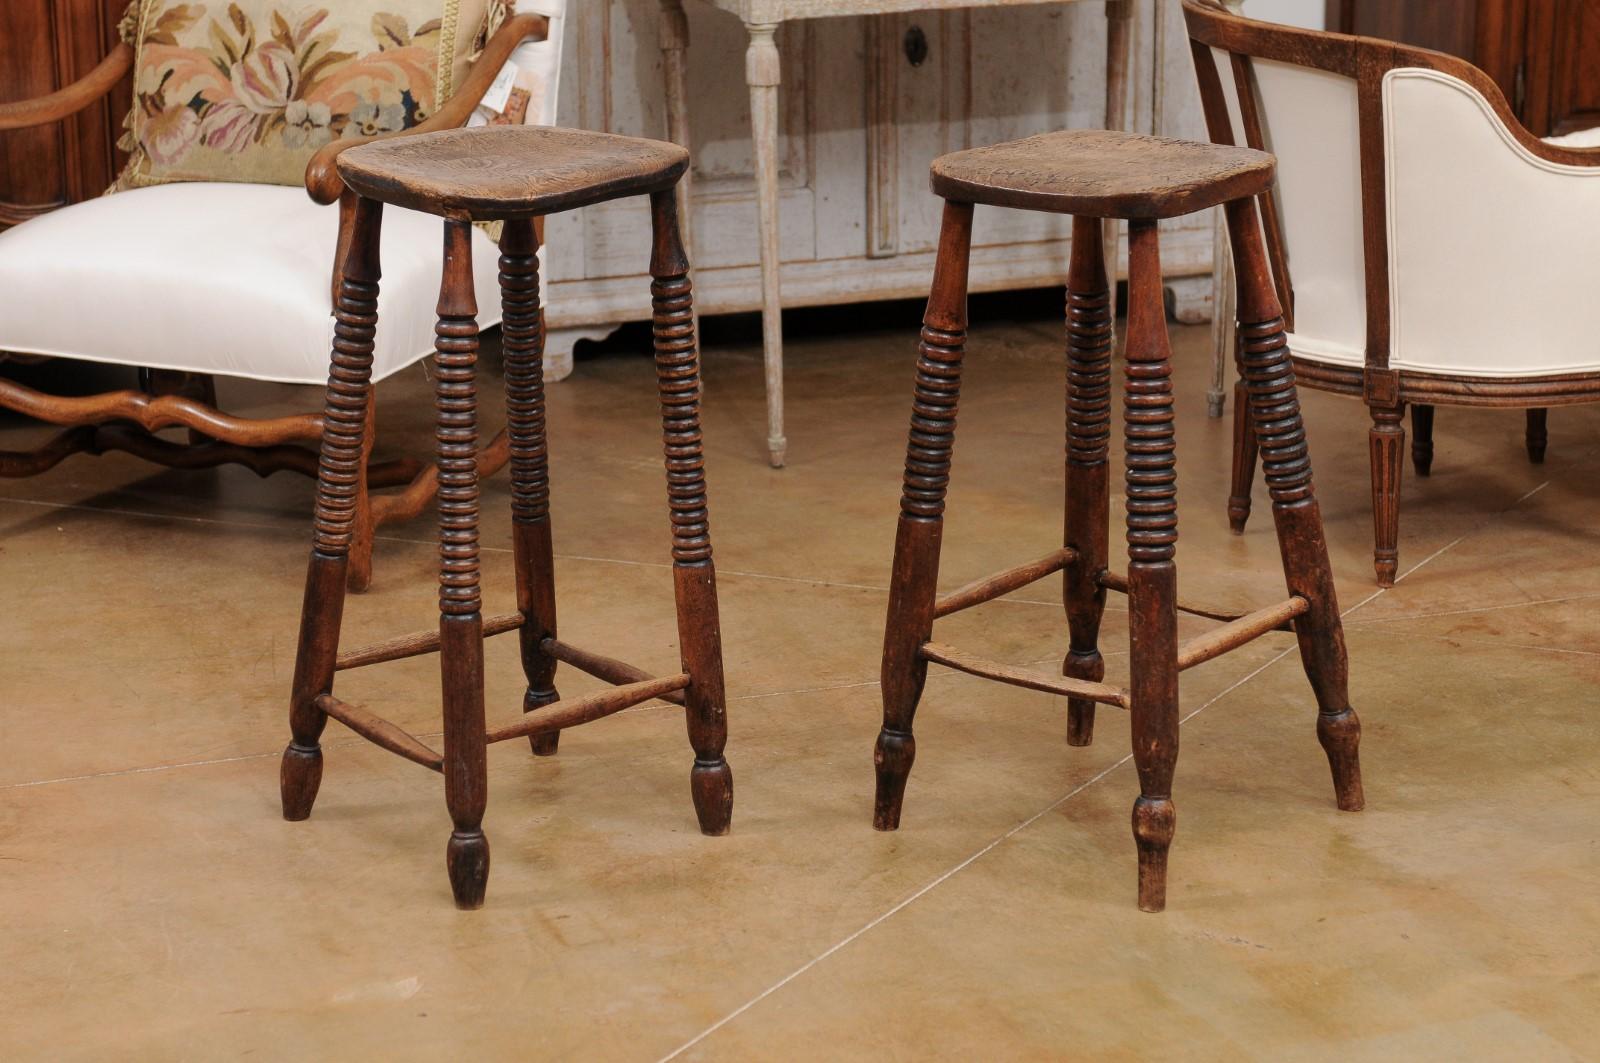 Pair of 1870s French Wooden Bar Stools with Spool Legs and Weathered Patina 2